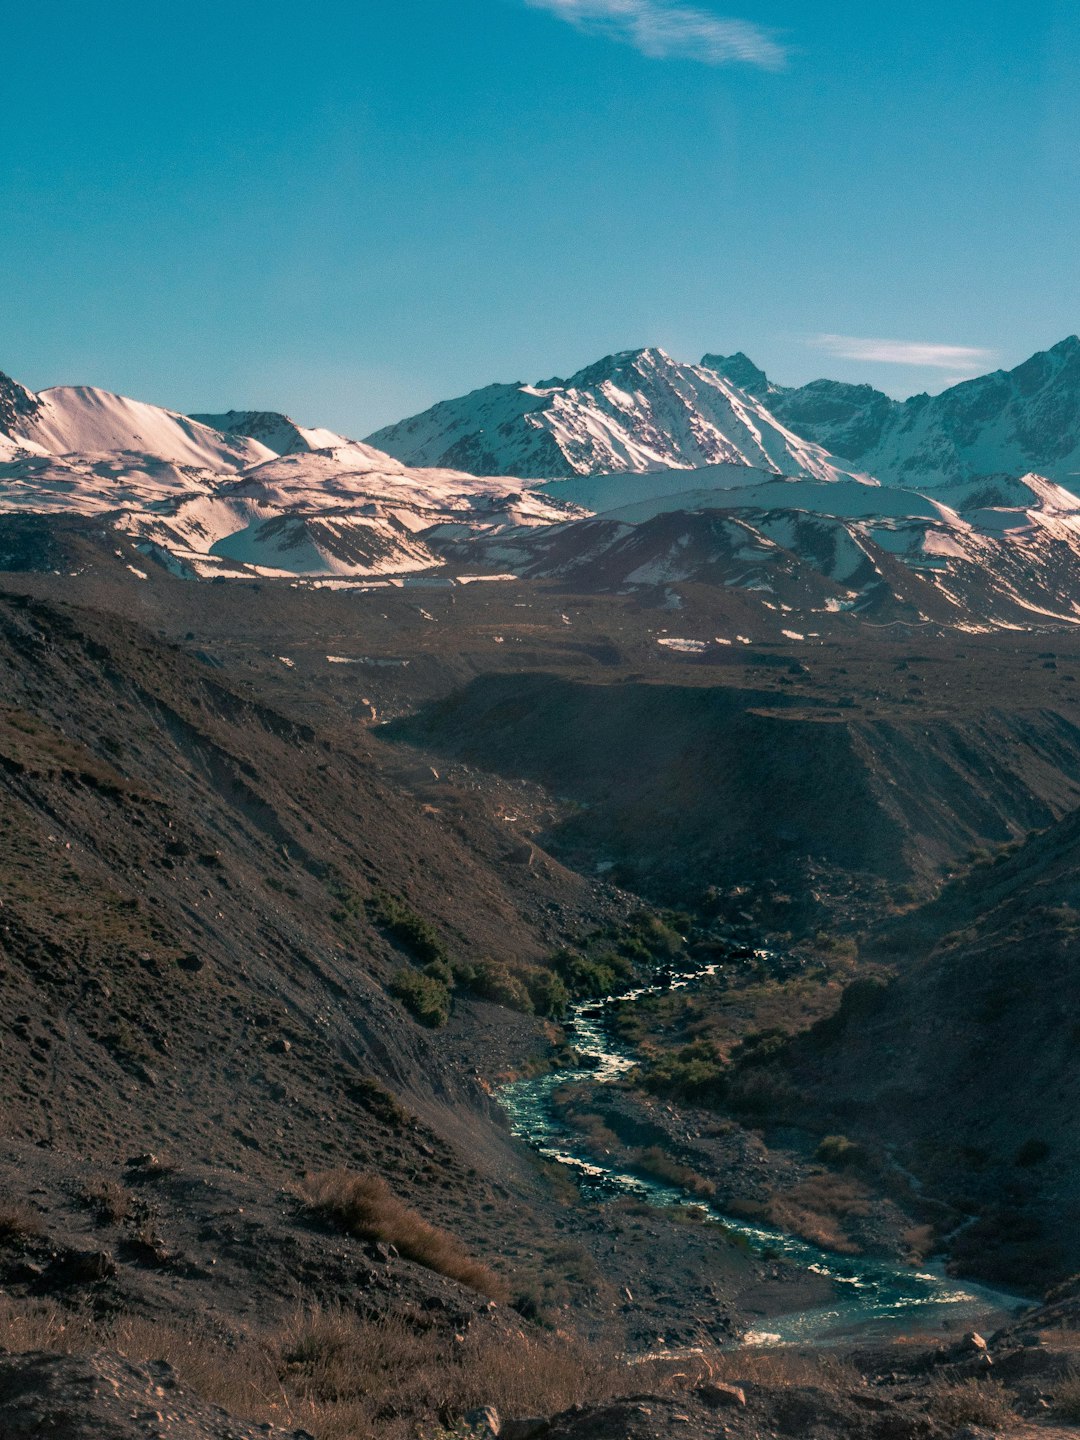 travelers stories about Mountain range in Cajon del Maipo, Chile